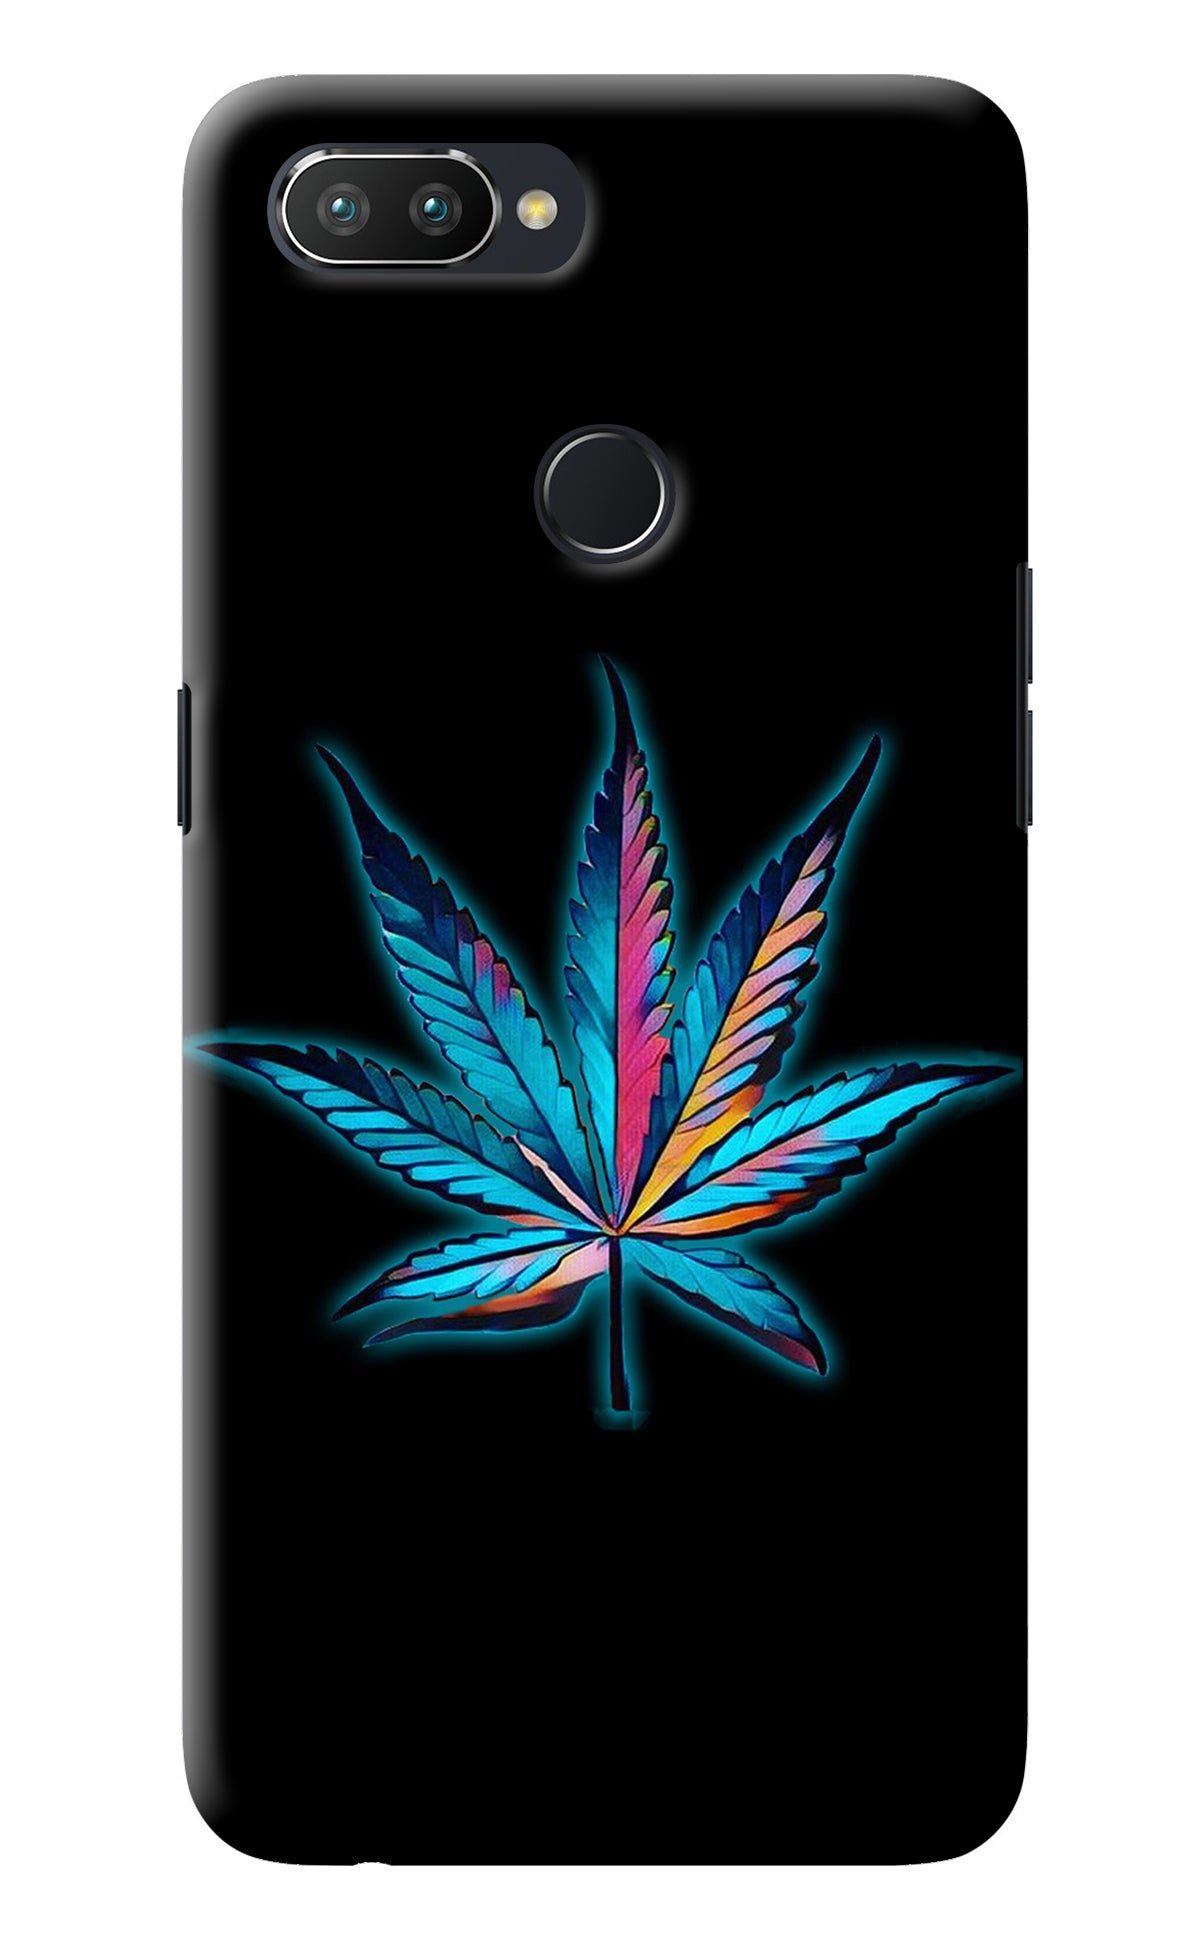 Weed Realme 2 Pro Back Cover